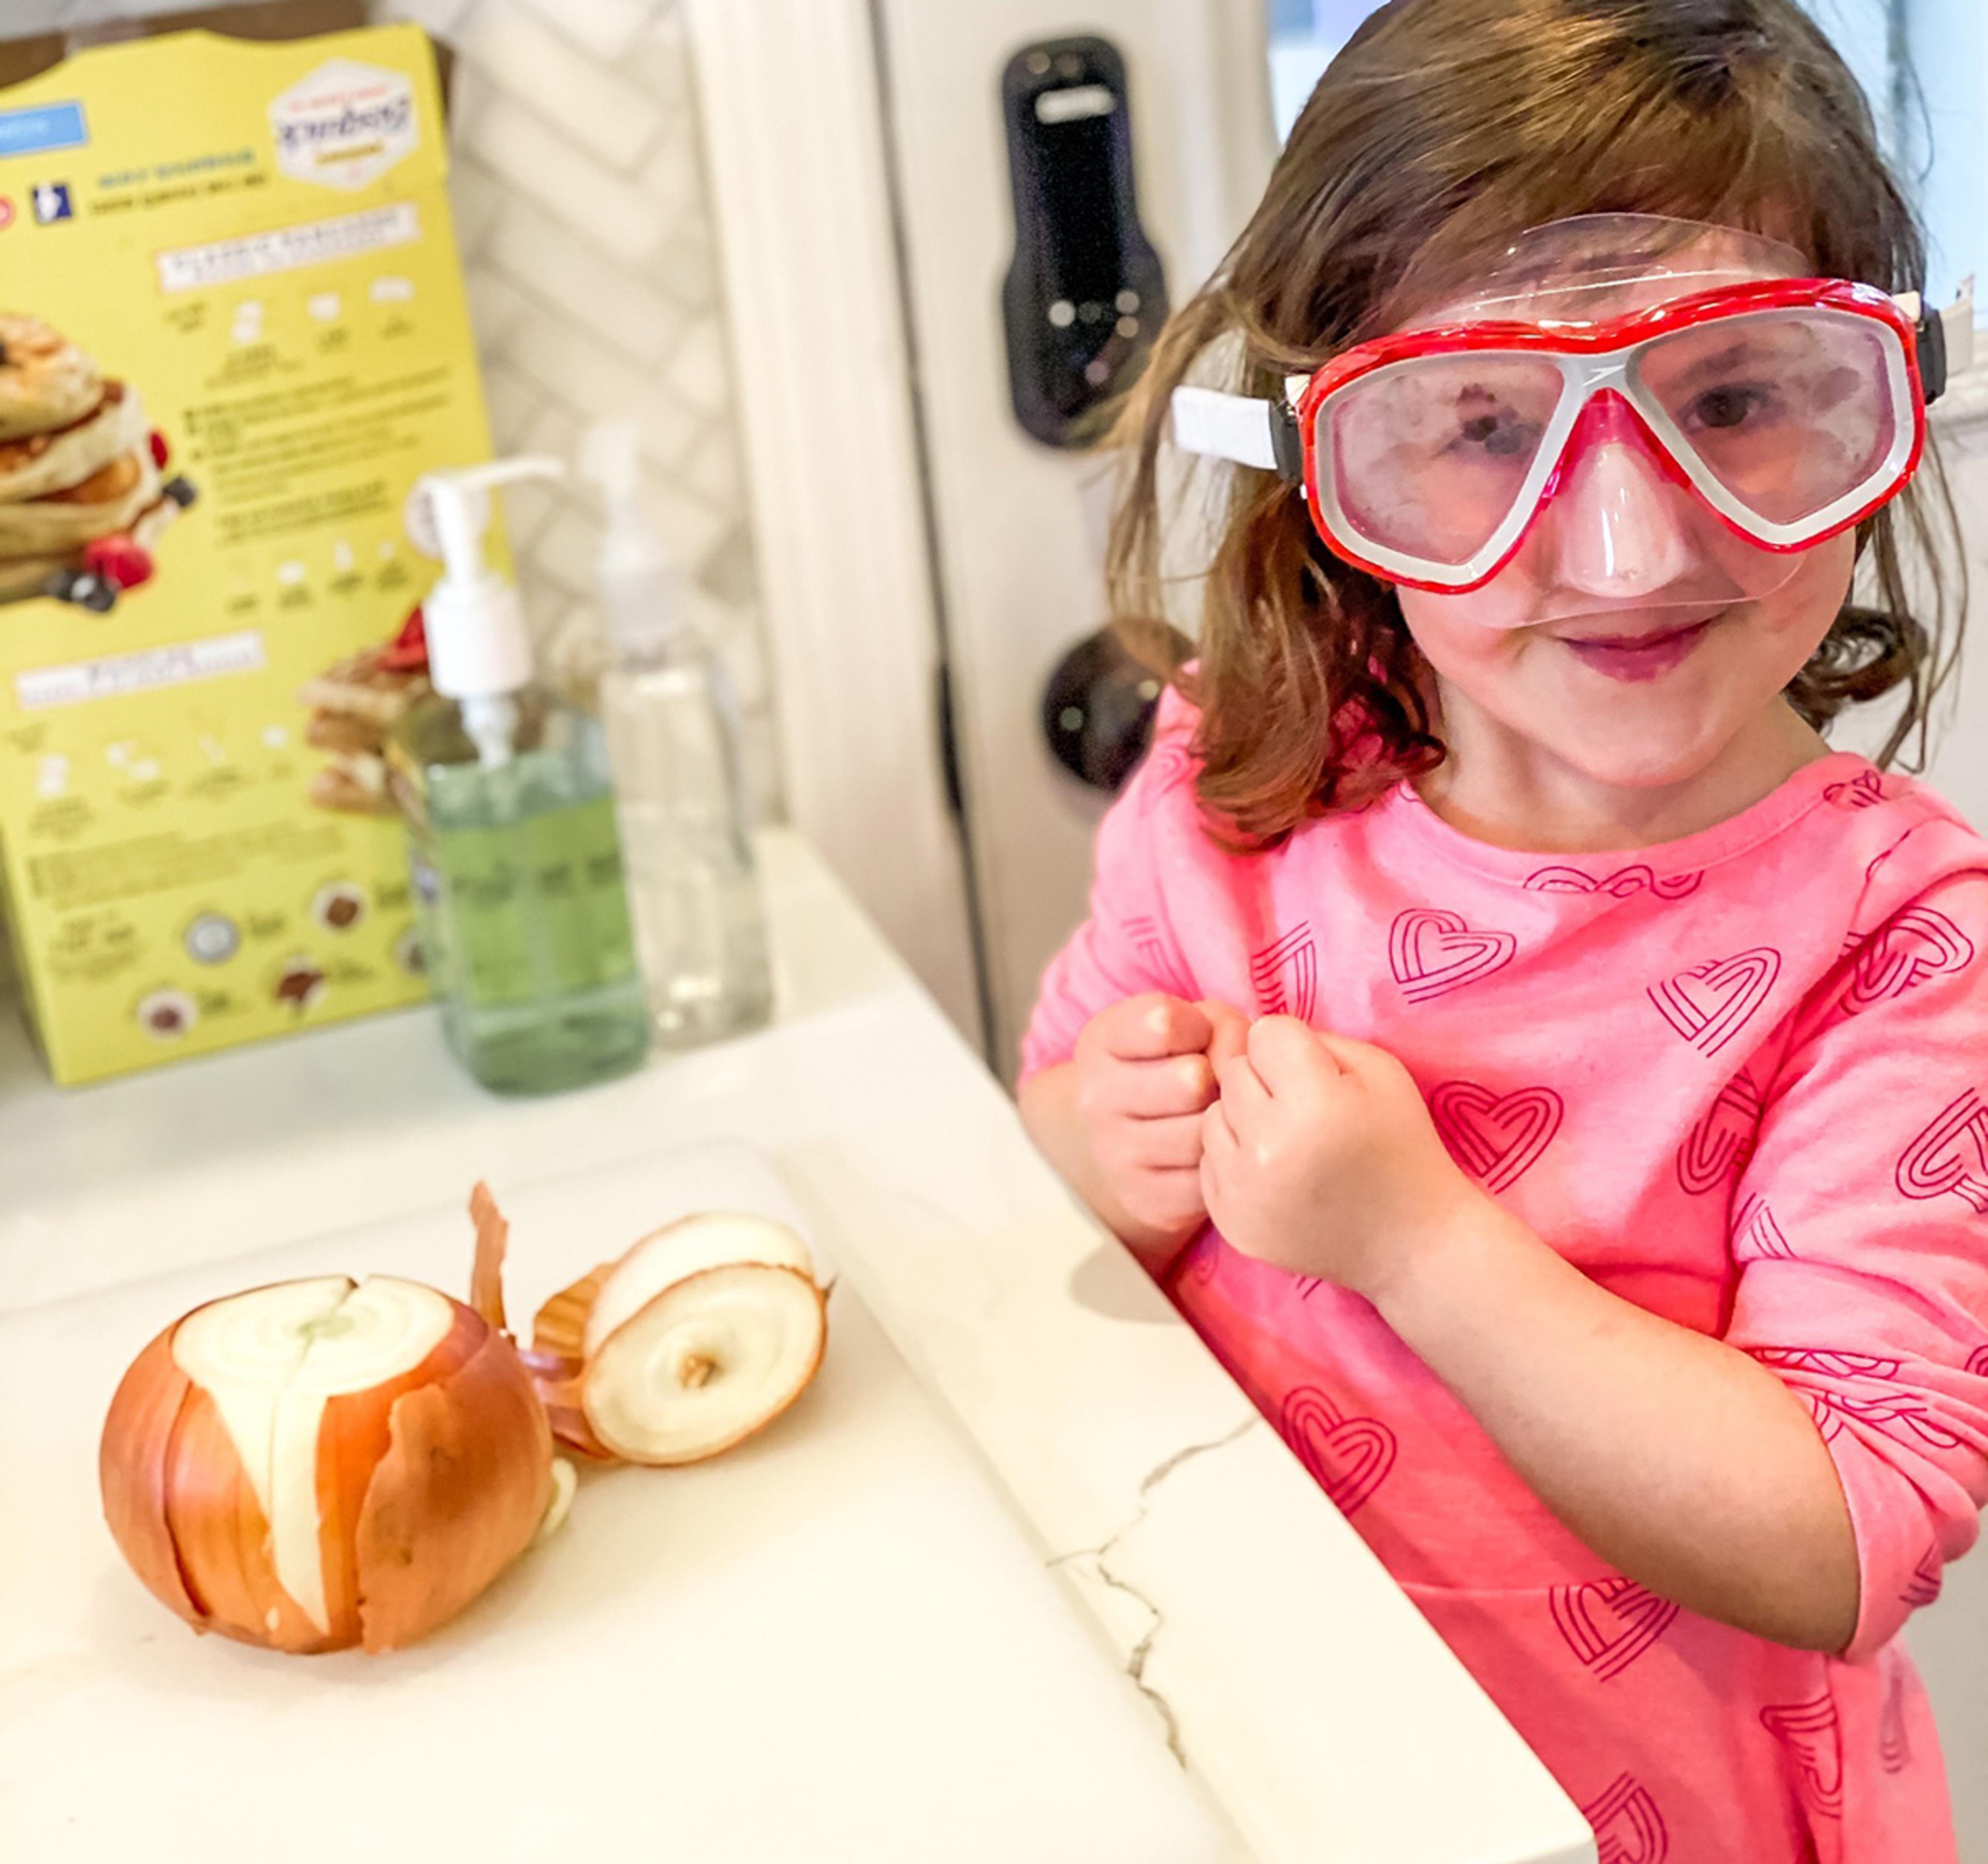 Young girl in goggles cuts up an onion in the kitchen.